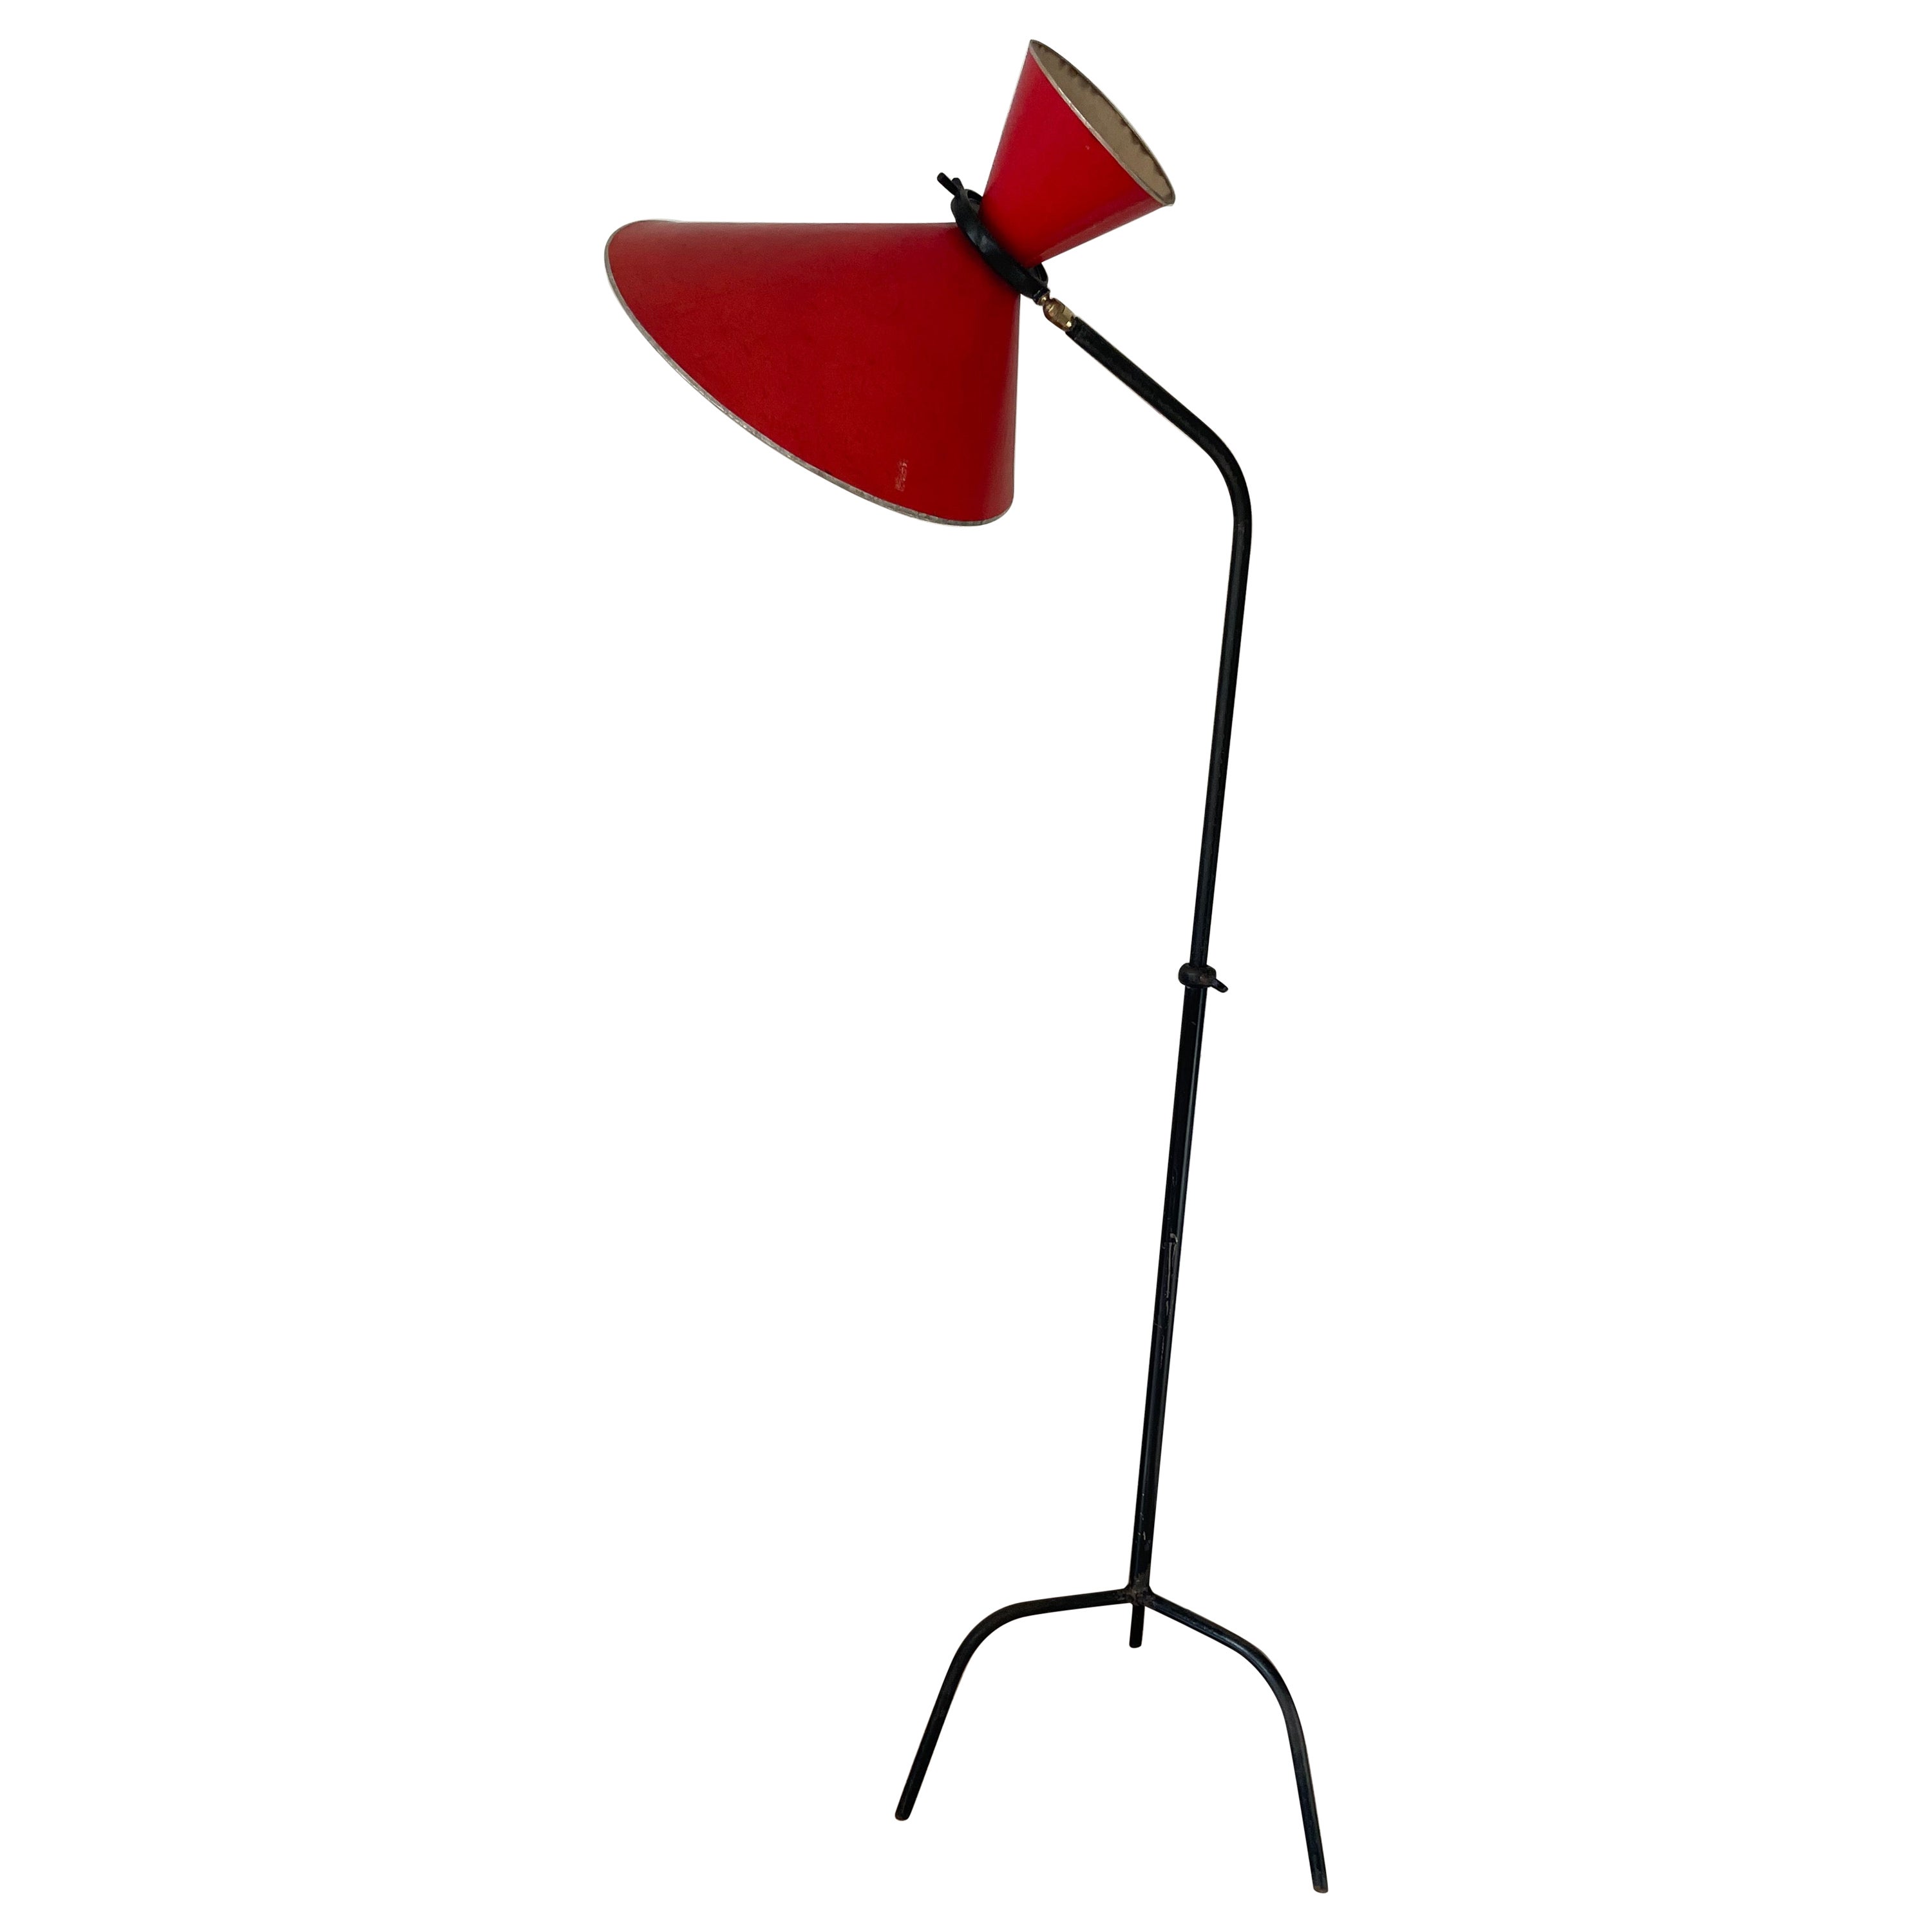 50's Adjustable Floor Lamp With Red Diabolo Shade by Maison Lunel, France 1954. For Sale